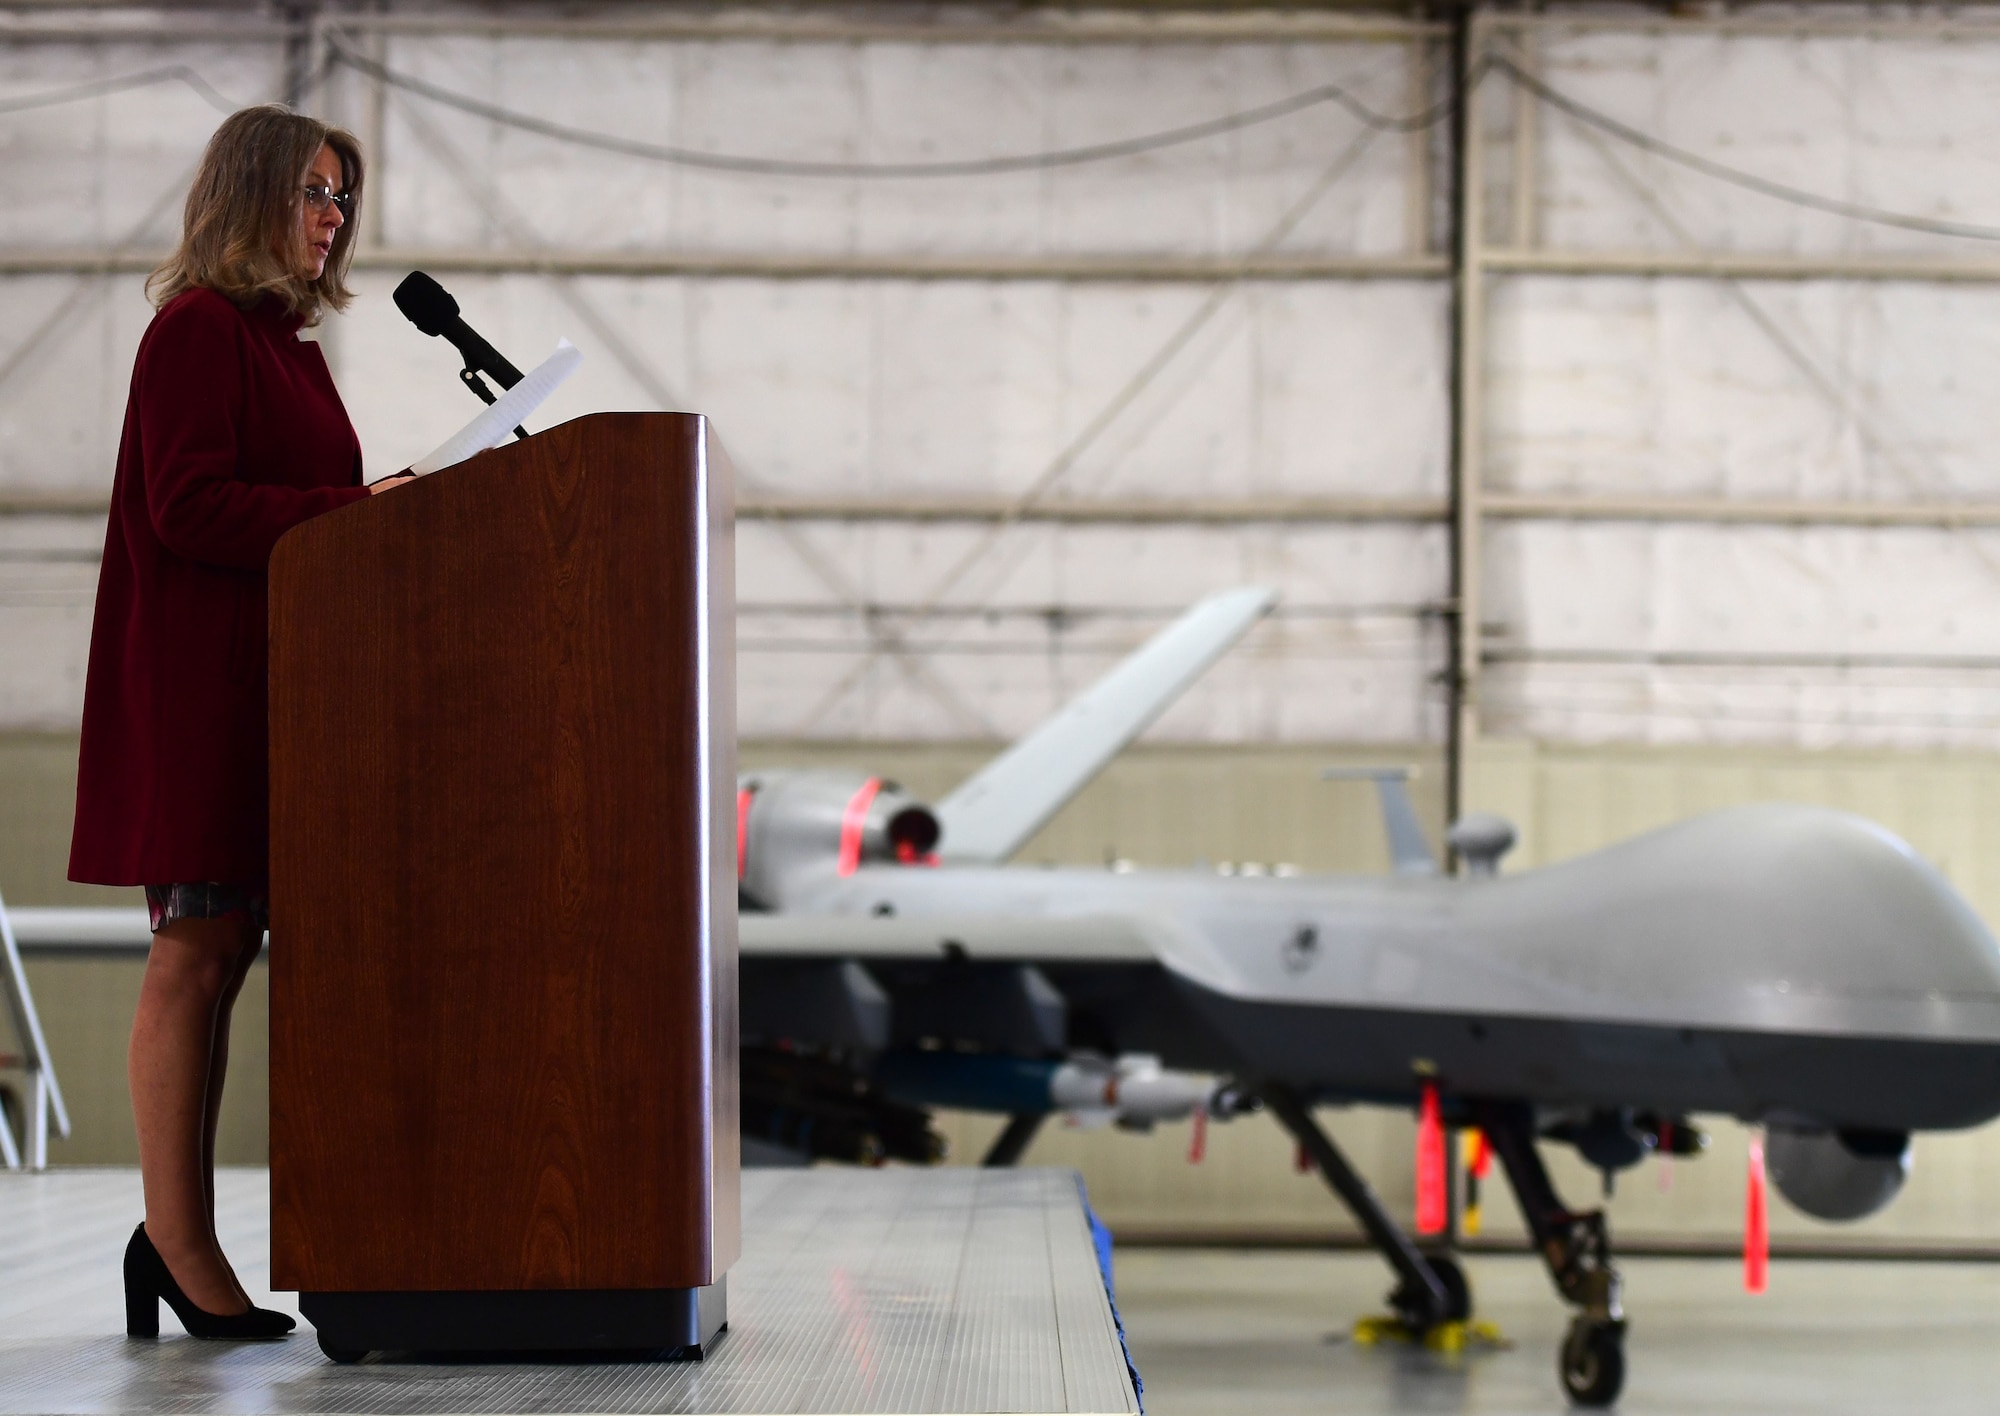 Ms. Jonna Doolittle Hoppes, executive director of the Doolittle Foundation and granddaughter of Gen. James “Jimmy” Doolittle, speaks to the men and women of the 432nd Wing/432nd Air Expeditionary Wing Jan. 18, 2018, at Creech Air Force Base, Nev. Doolittle Hoppes and retired Lt. Gen. Christopher Miller, president of the Air Force Historical Foundation, presented the General James H. “Jimmy” Doolittle award to the 432nd Wing/432nd Air Expeditionary Wing for making a significant impact to Air Force history. (U.S. Air Force photo/Senior Airman Christian Clausen)